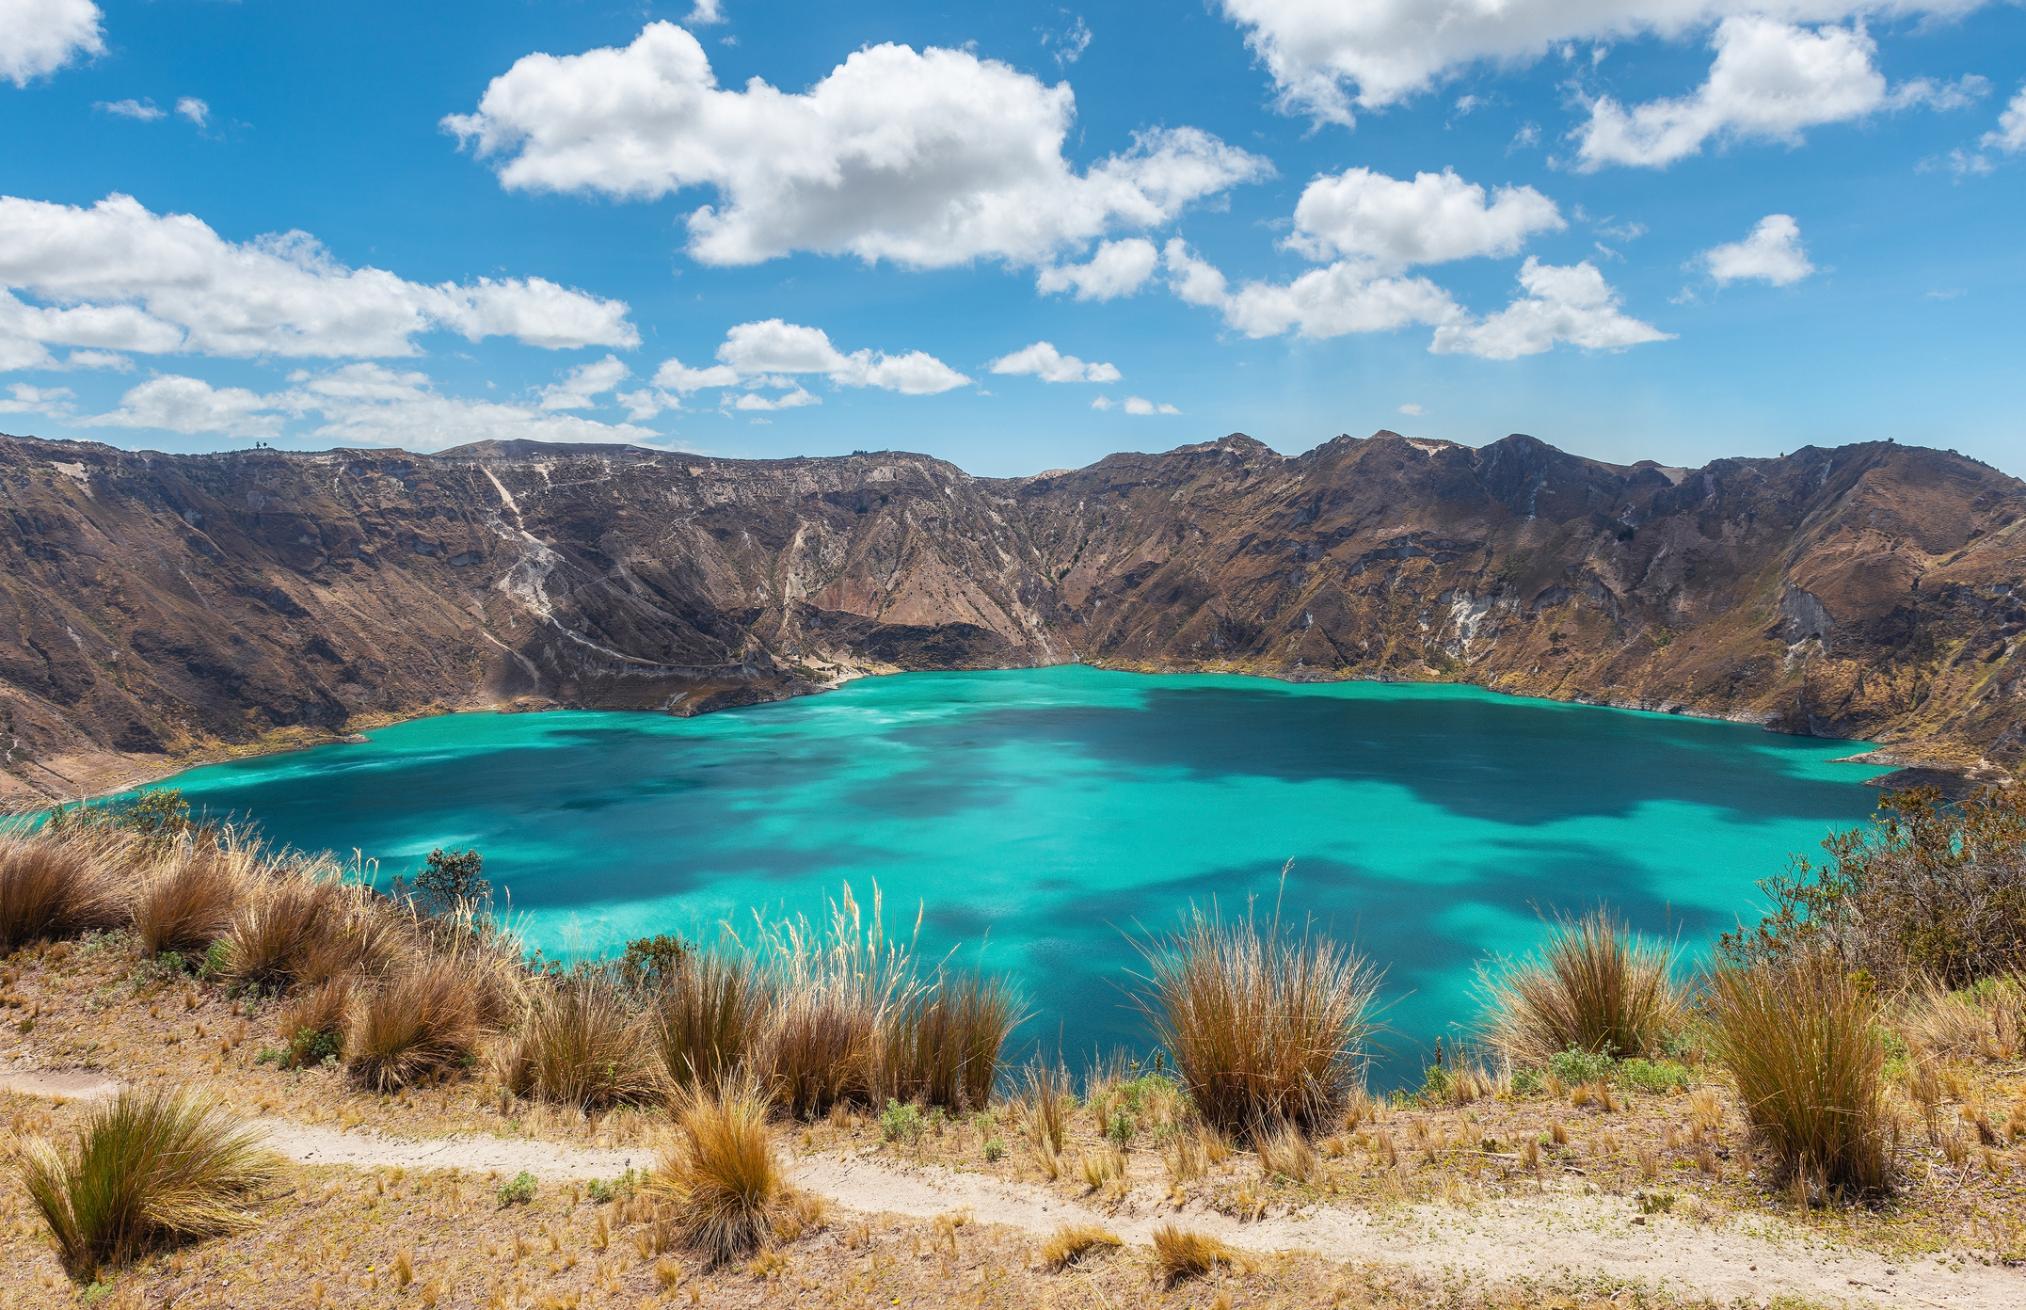 Discovering Lake Quilotoa: Turquoise Beauty in the Ecuadorian Andes